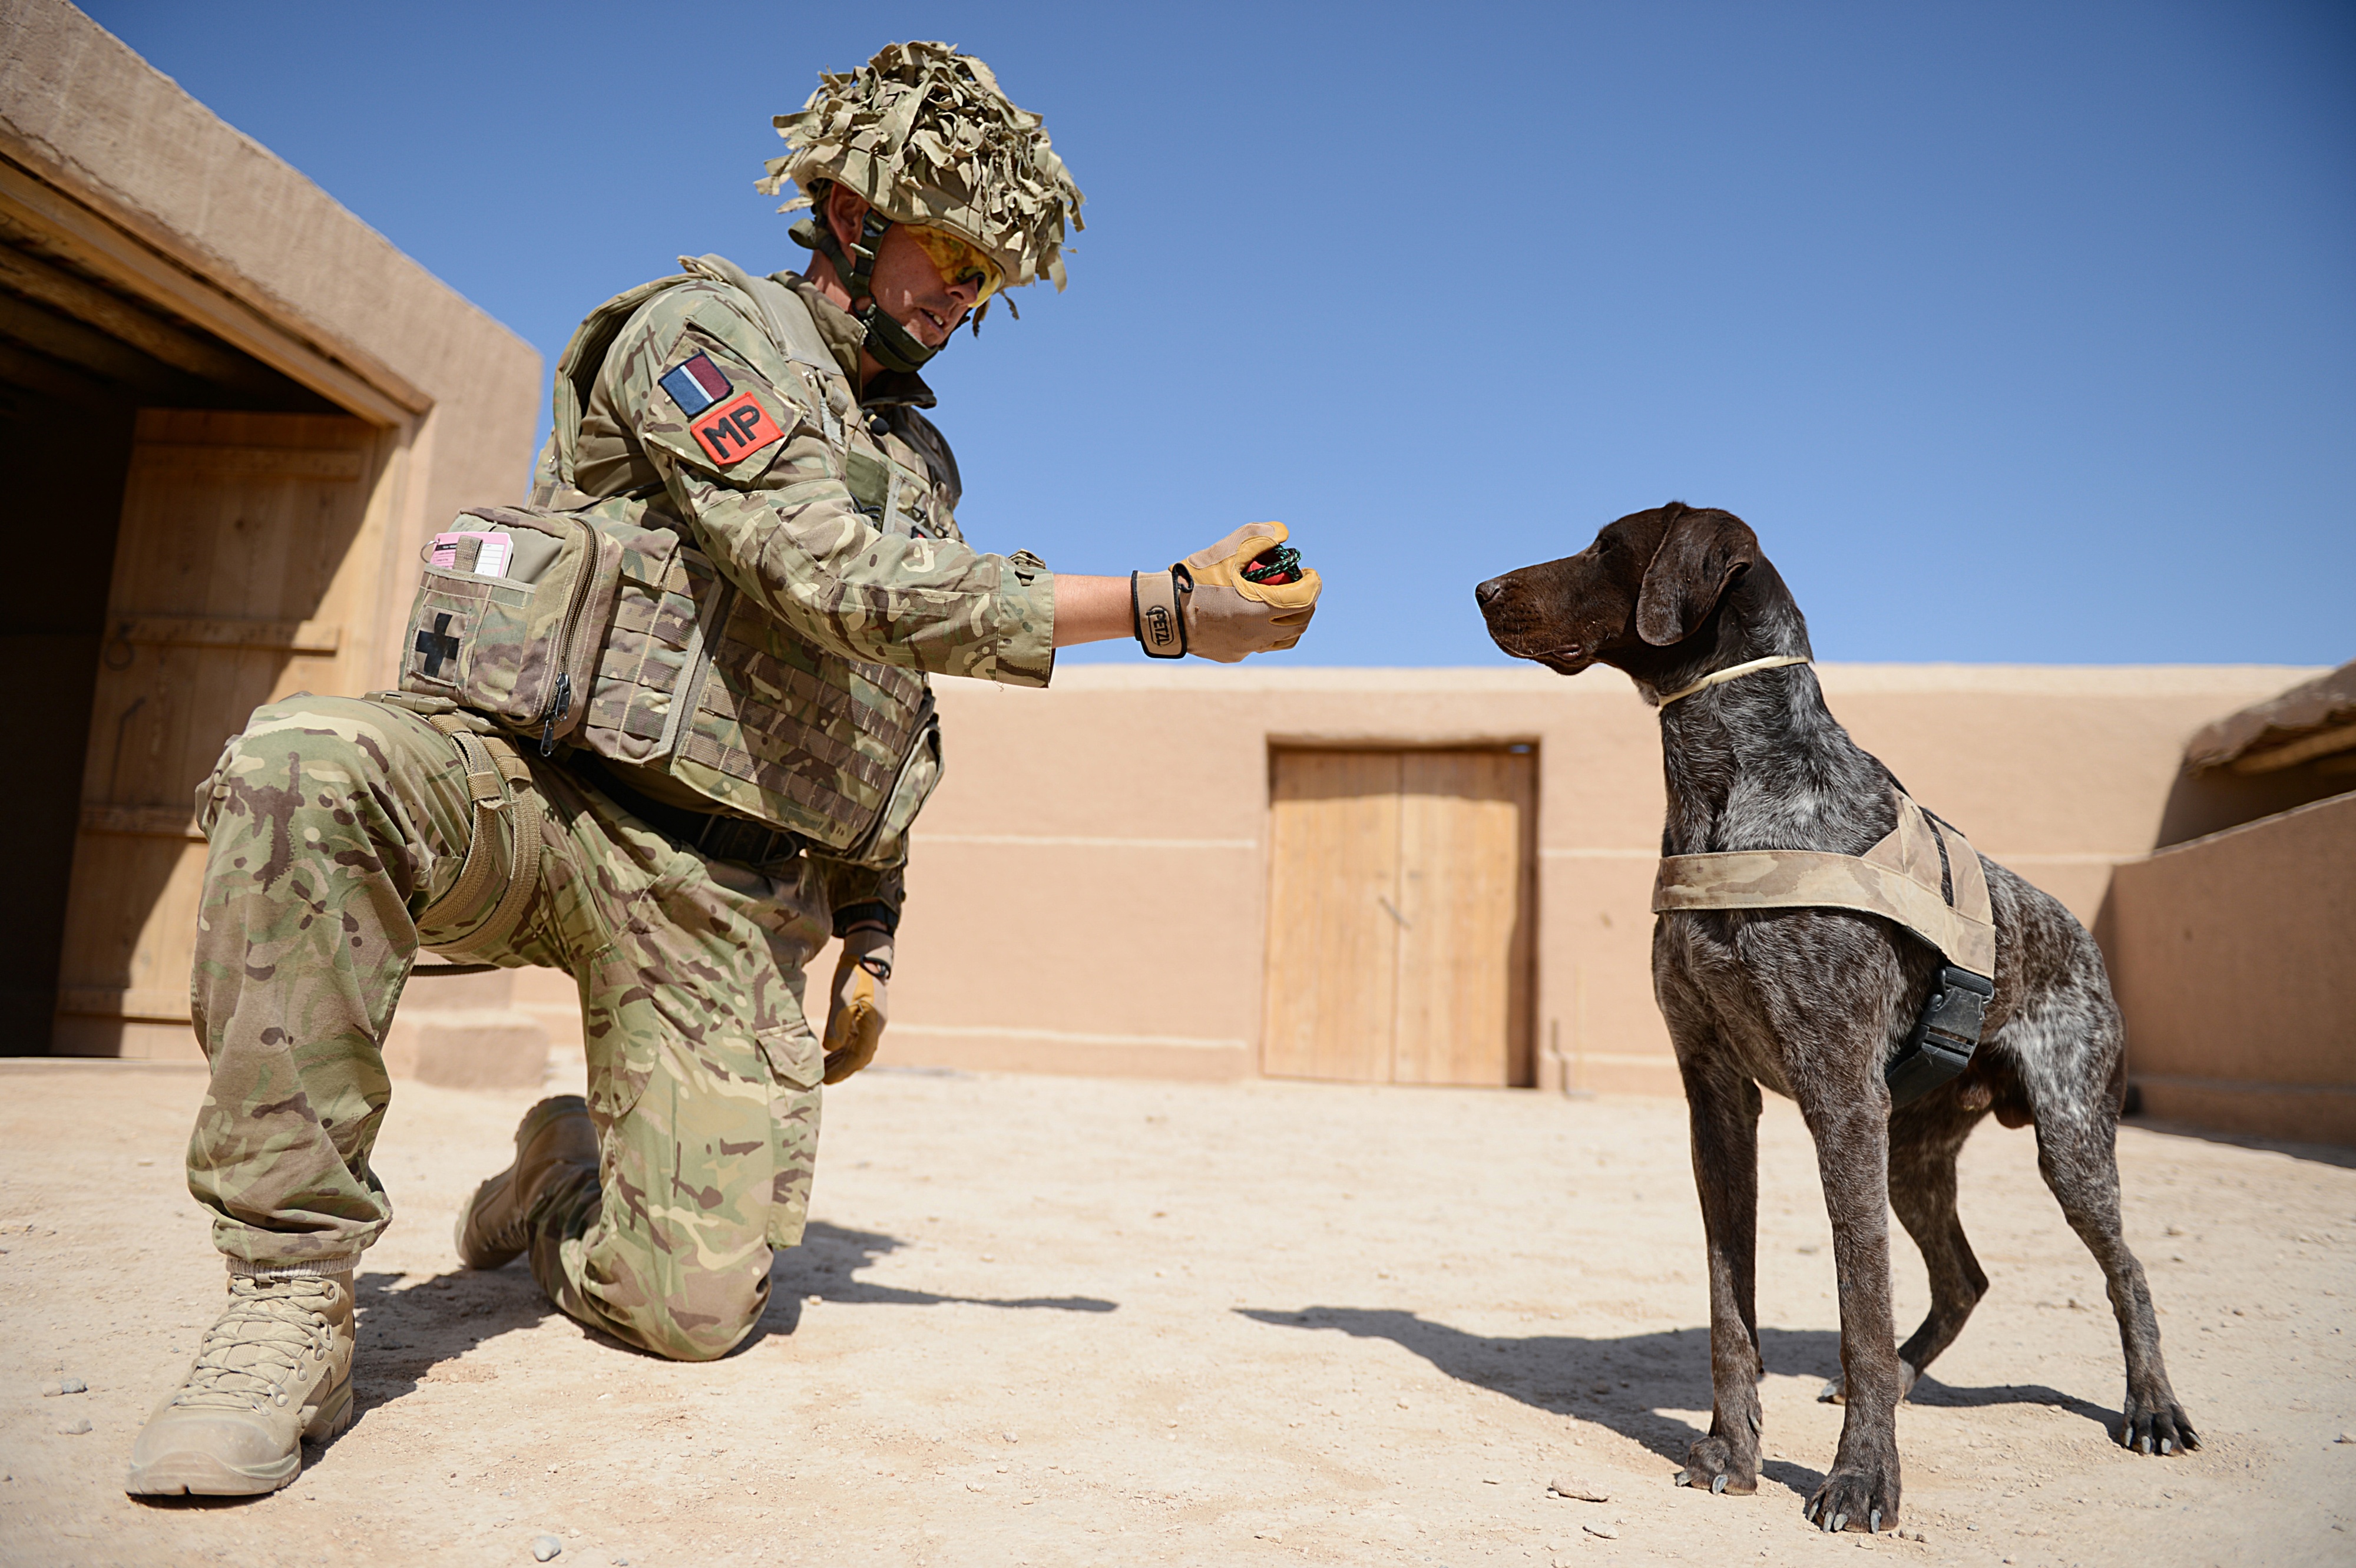 RAF Policeman holds out hand to military working dog.